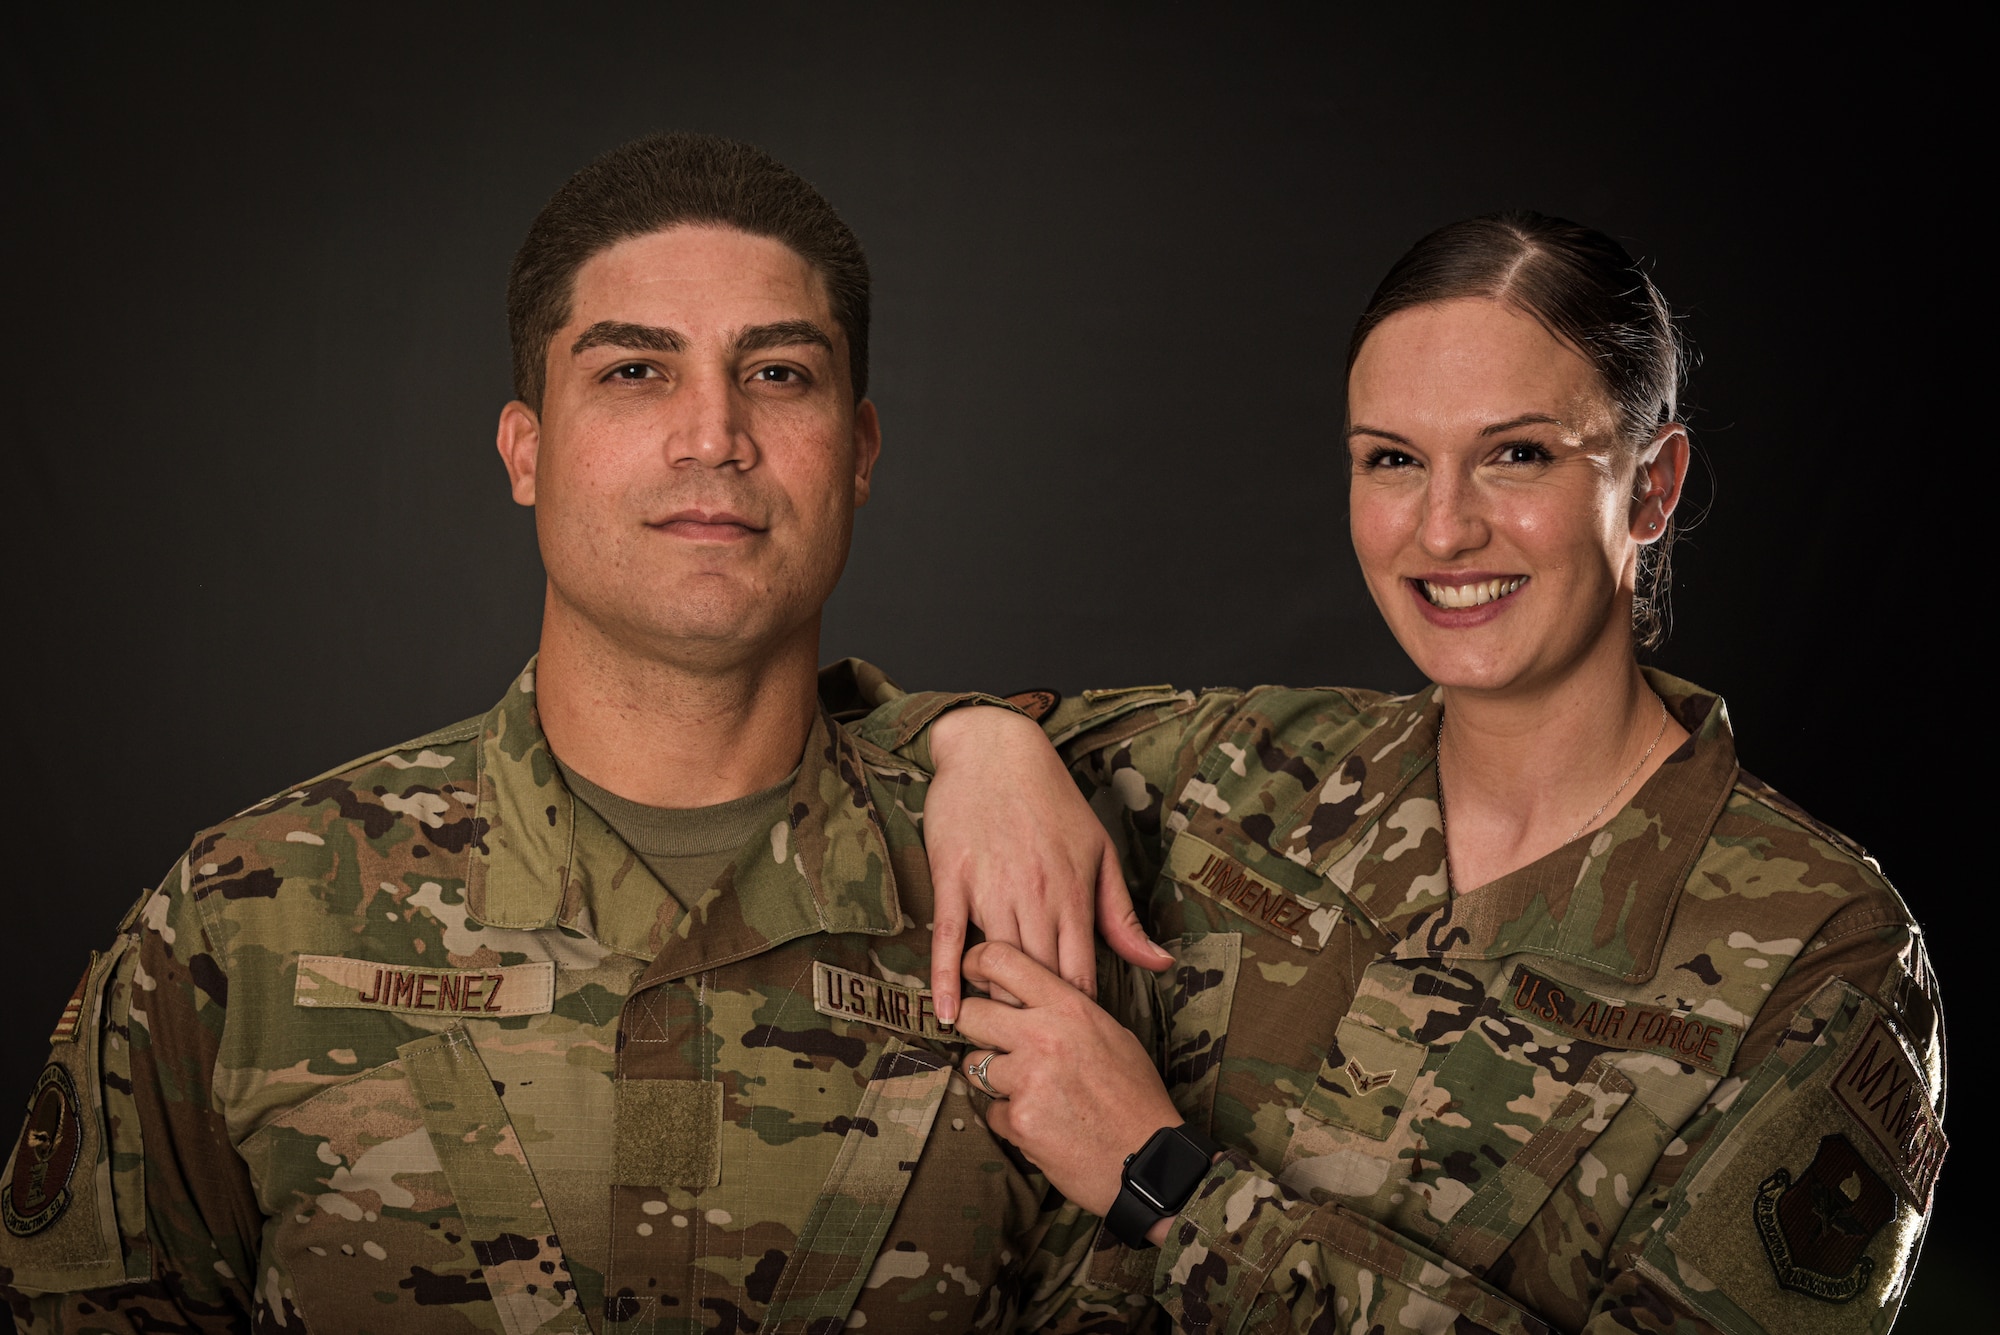 U.S. Air Force Airman Basic Richard Jimenez, 56th Contracting Squadron contract specialist, and his wife, U.S. Air Force Airman 1st Class Jenna Jimenez, 308th Aircraft Maintenance Unit analyst, pose together Nov. 5, 2021, at Luke Air Force Base, Arizona.